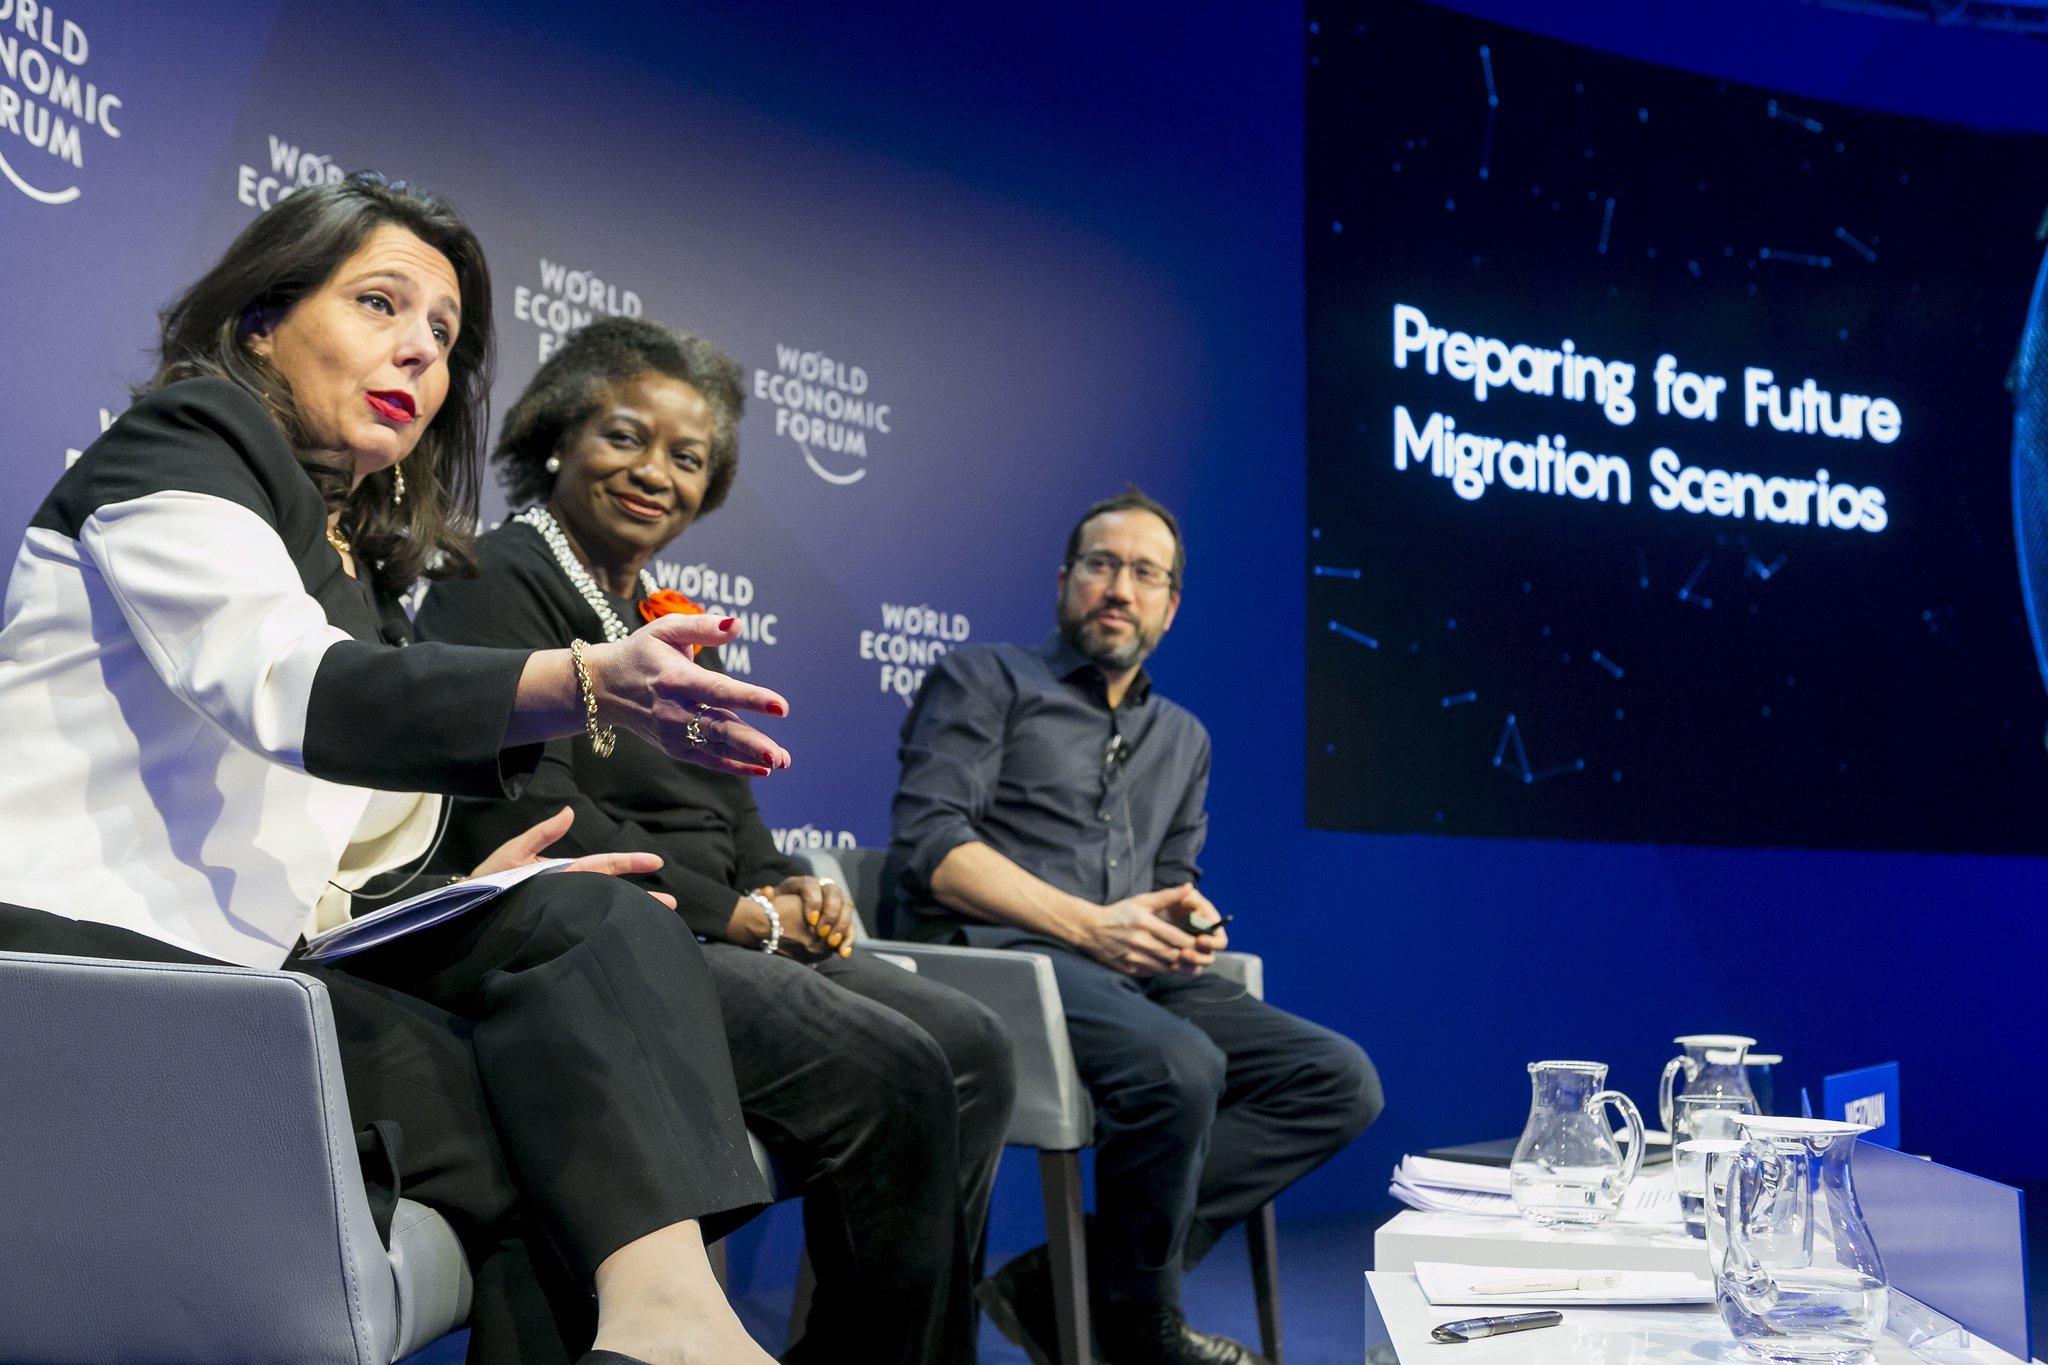 Sara Pantuliano chairs an event on 'Preparing for future migration scenarios' at the World Economic Forum, 2019. Photo: World Economic Forum/Benedikt von Loebell (CC BY-NC-SA 2.0)